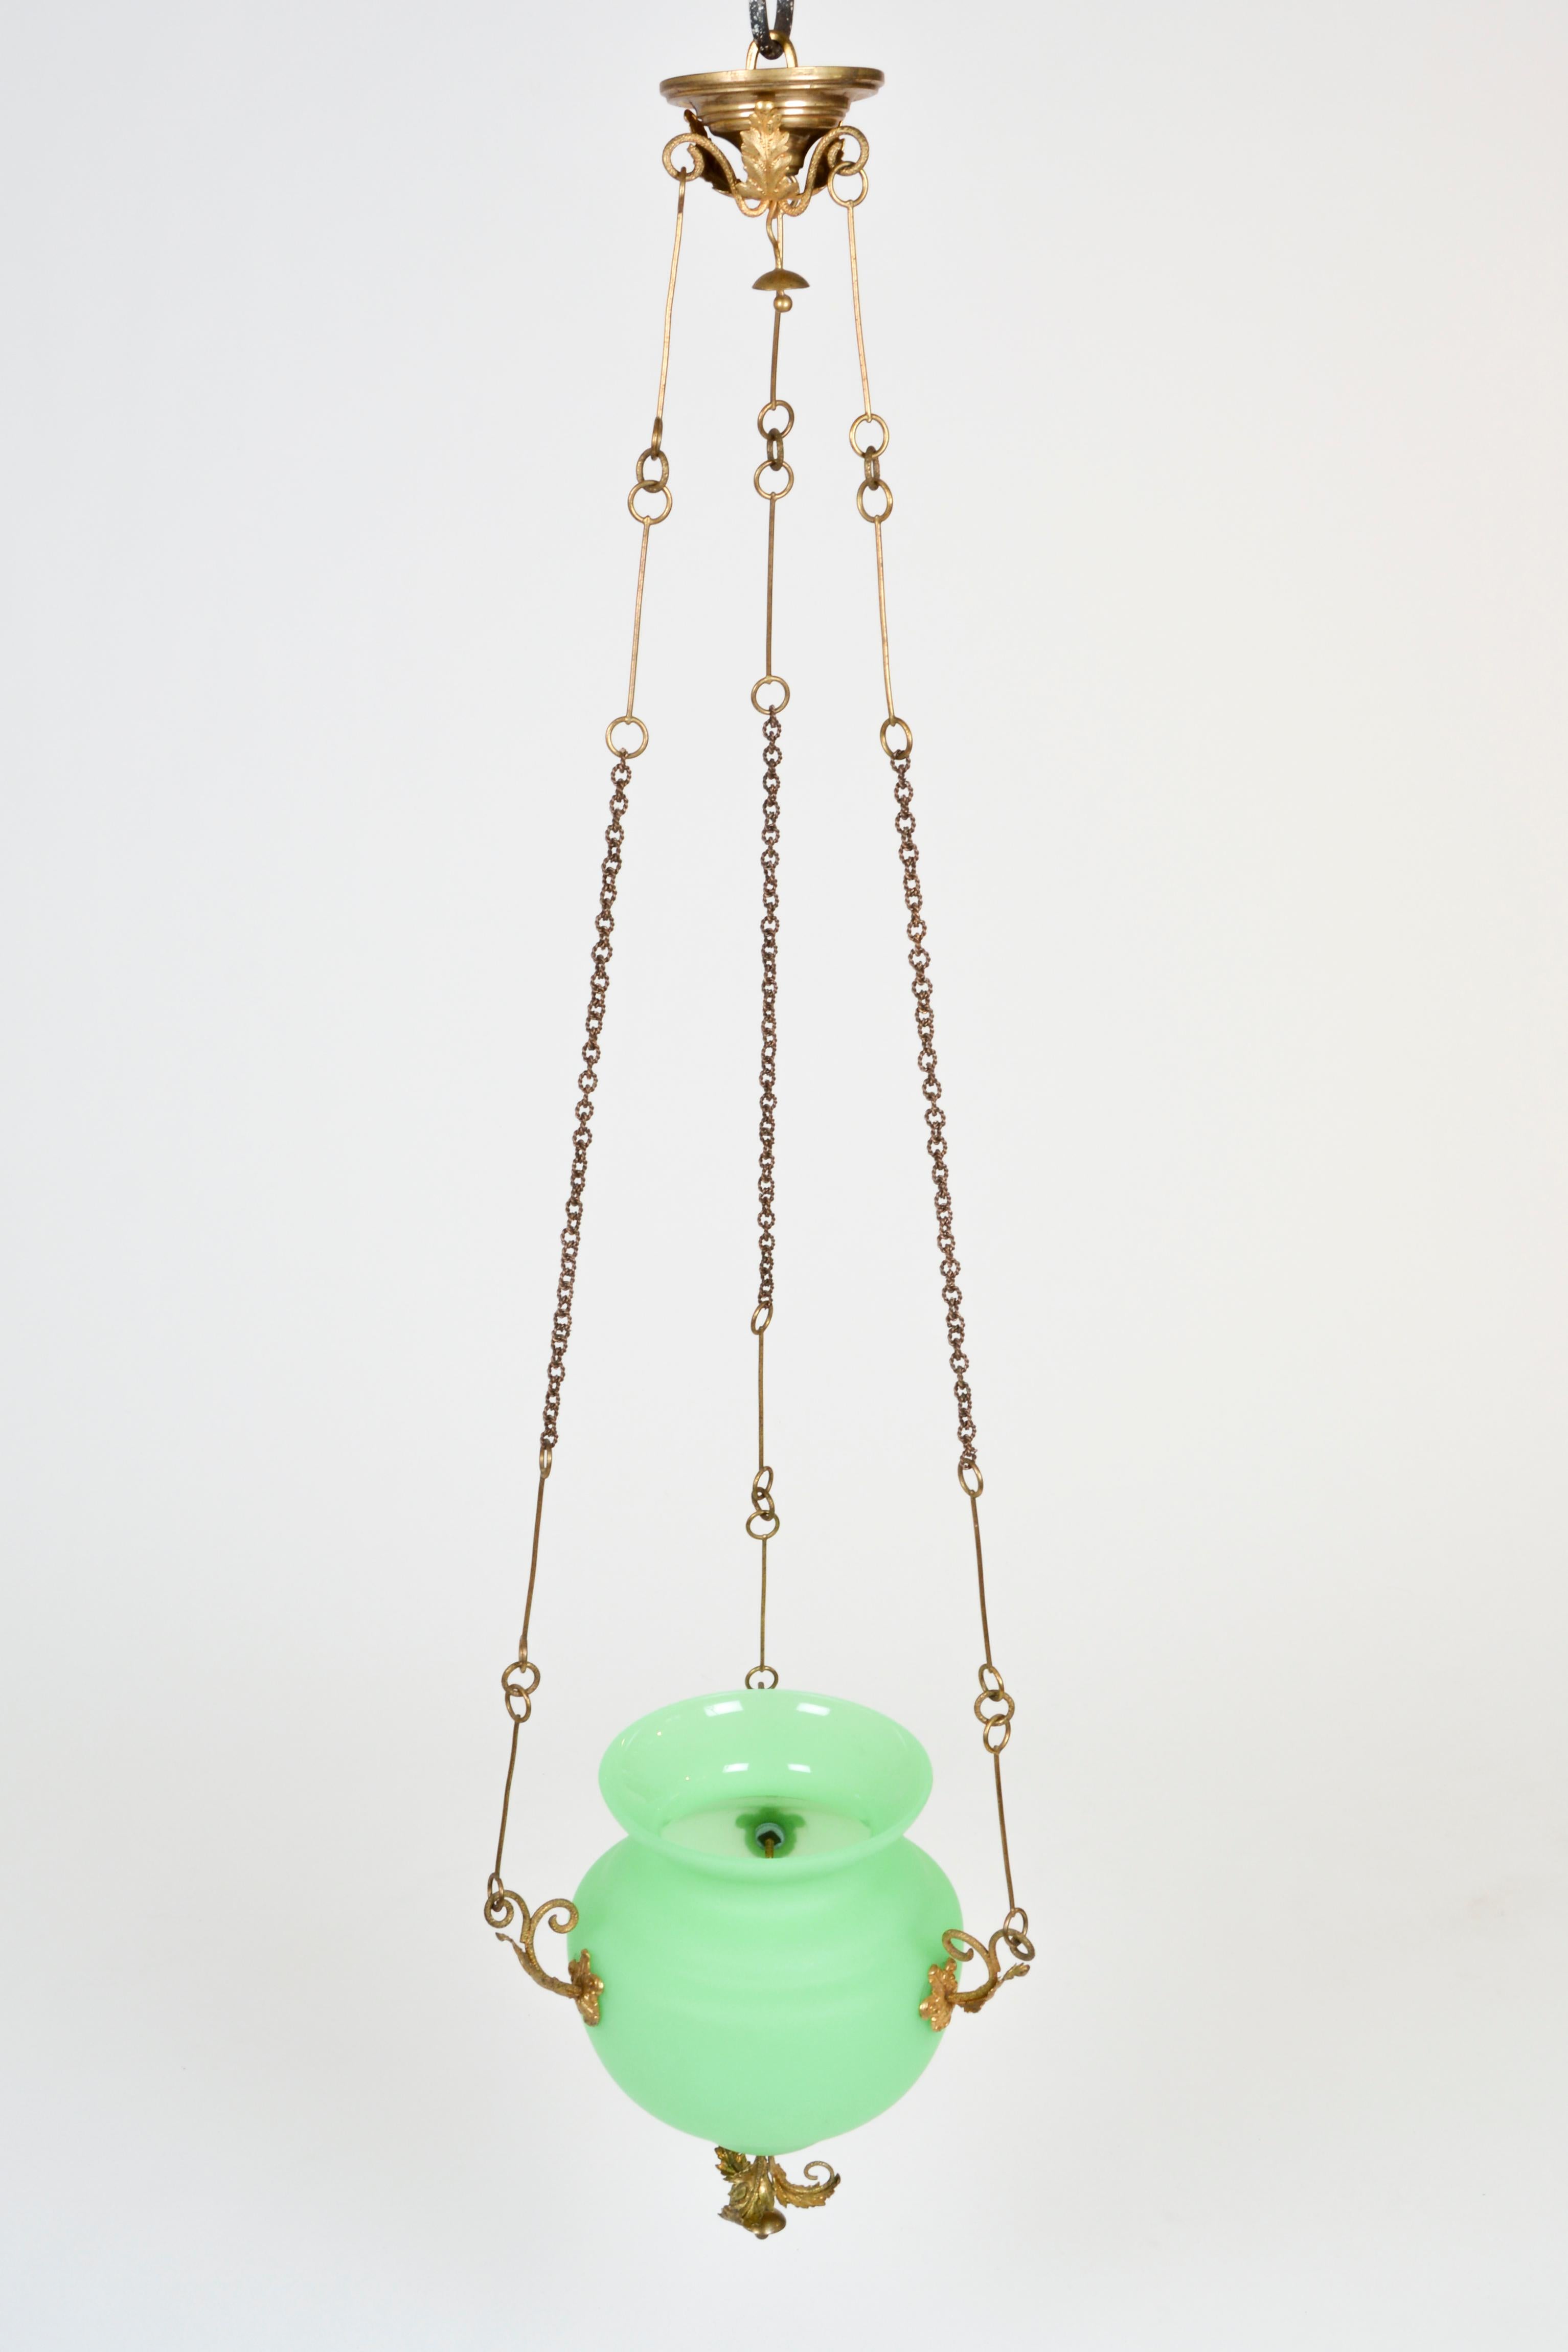 A lovely glass pendant with elaborately embossed brass suspension. The vase is of opaque glass of a striking green, typical for the period.
It emanates the romantic spirit of the Viennese Biedermeier spirit and fits perfectly in a powder room or